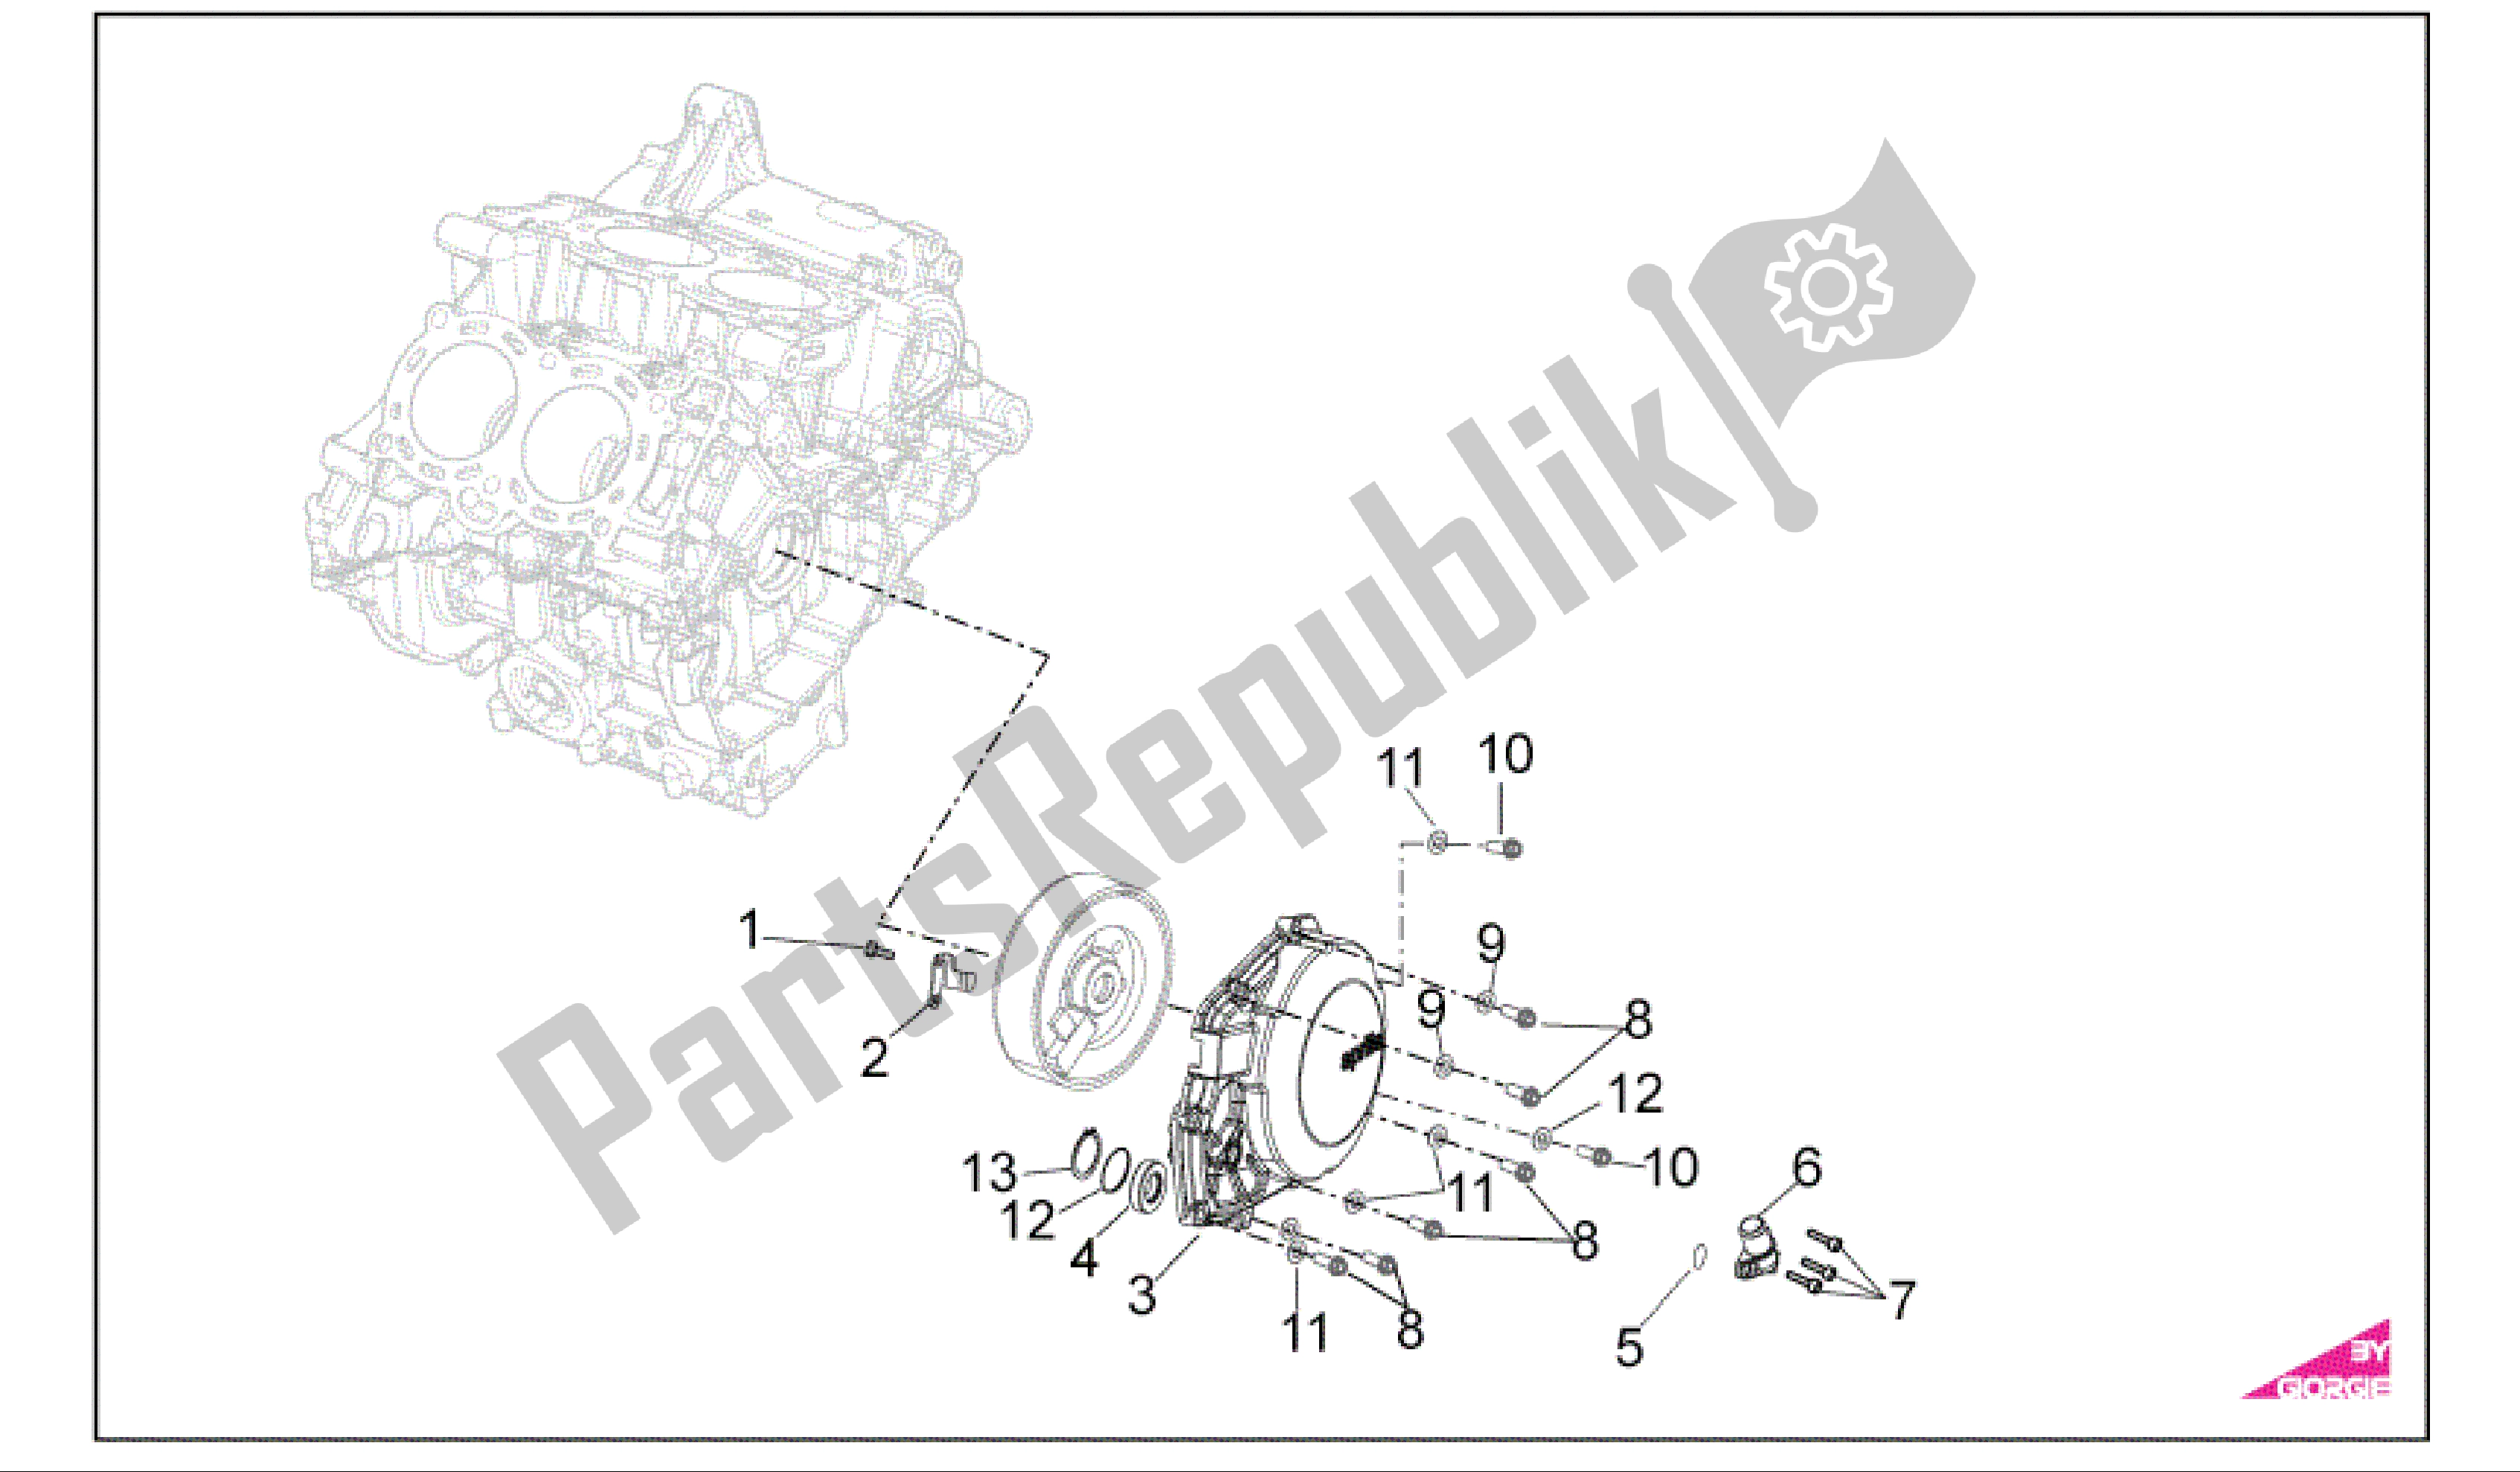 All parts for the Cover of the Aprilia RSV4 R 3980 1000 2009 - 2010